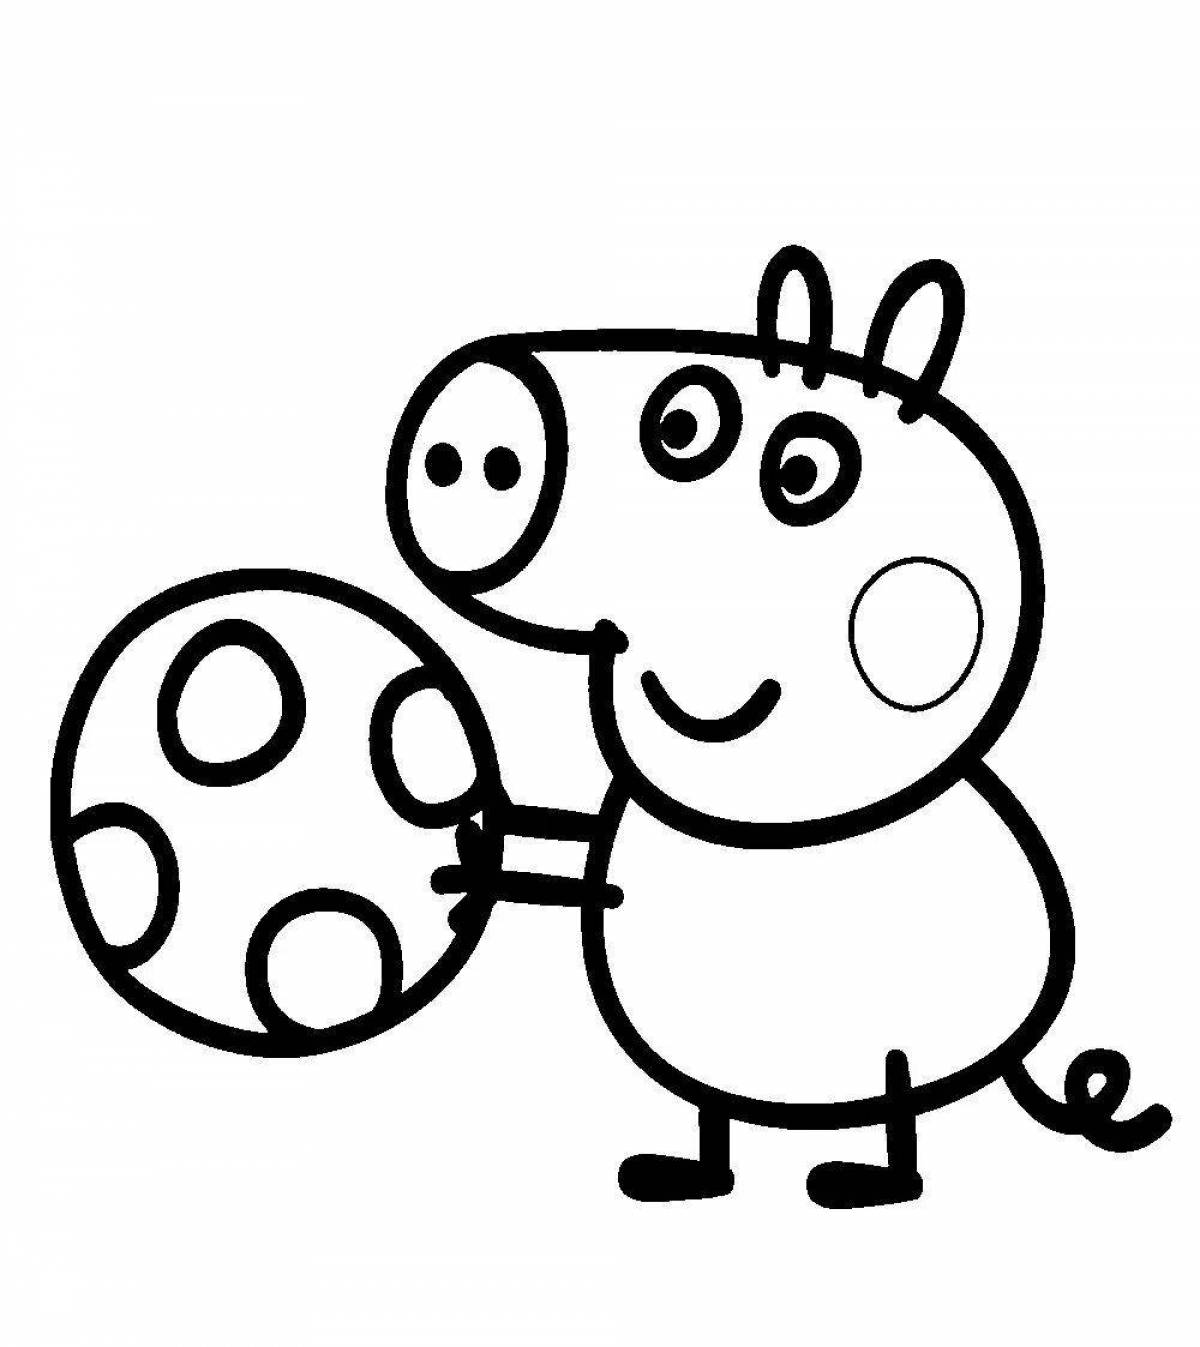 Bright peppa pig coloring for kids